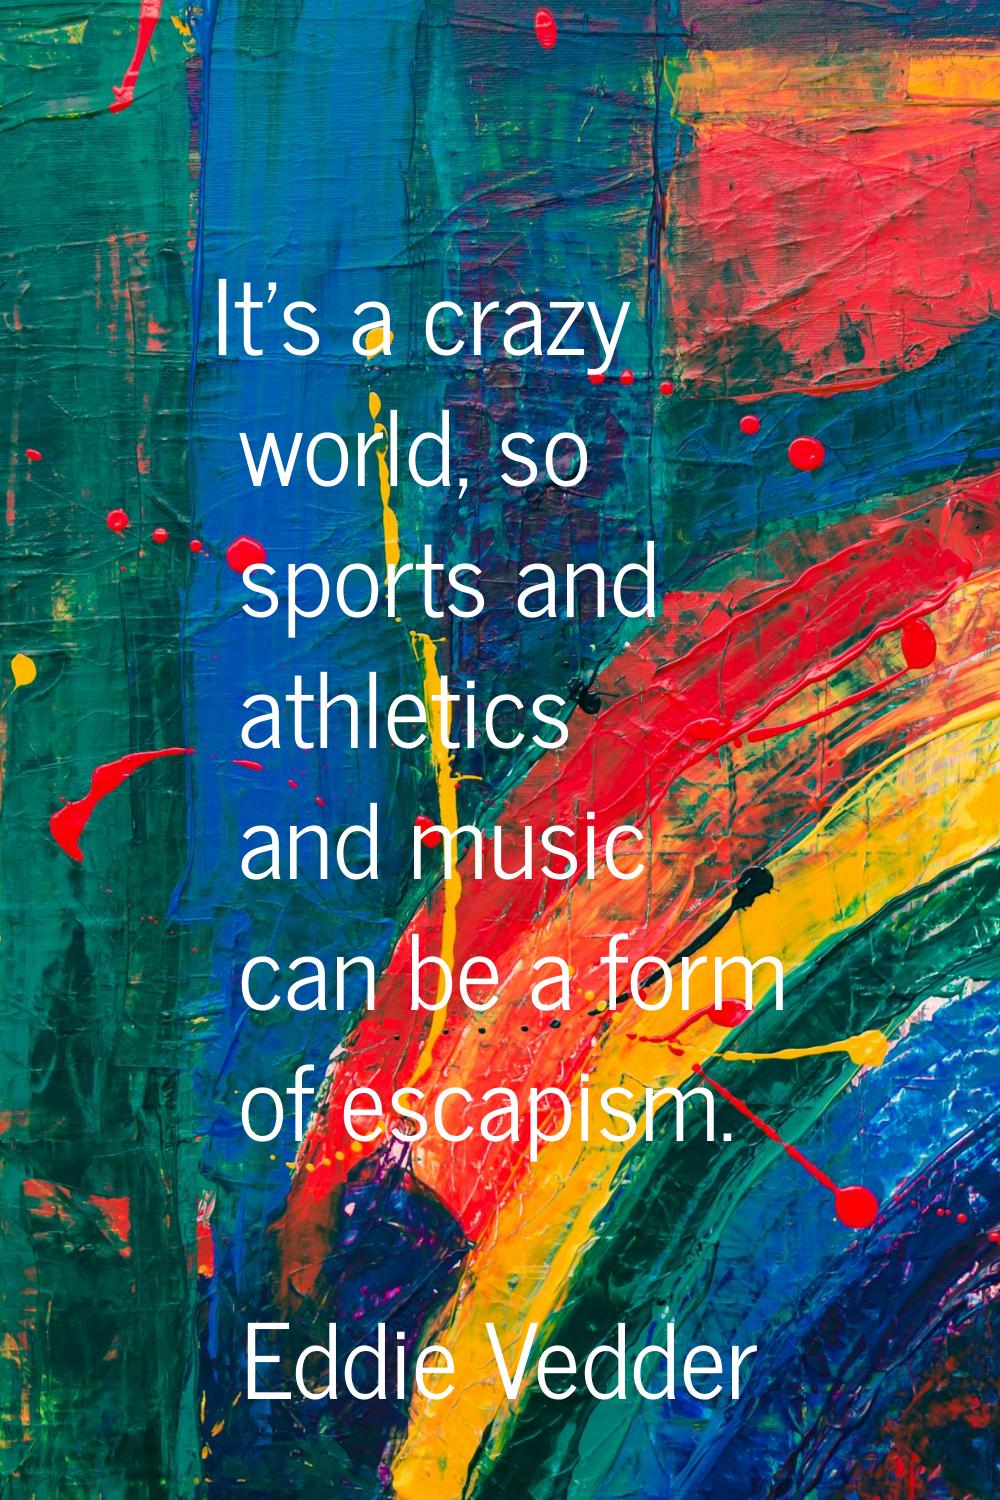 It's a crazy world, so sports and athletics and music can be a form of escapism.